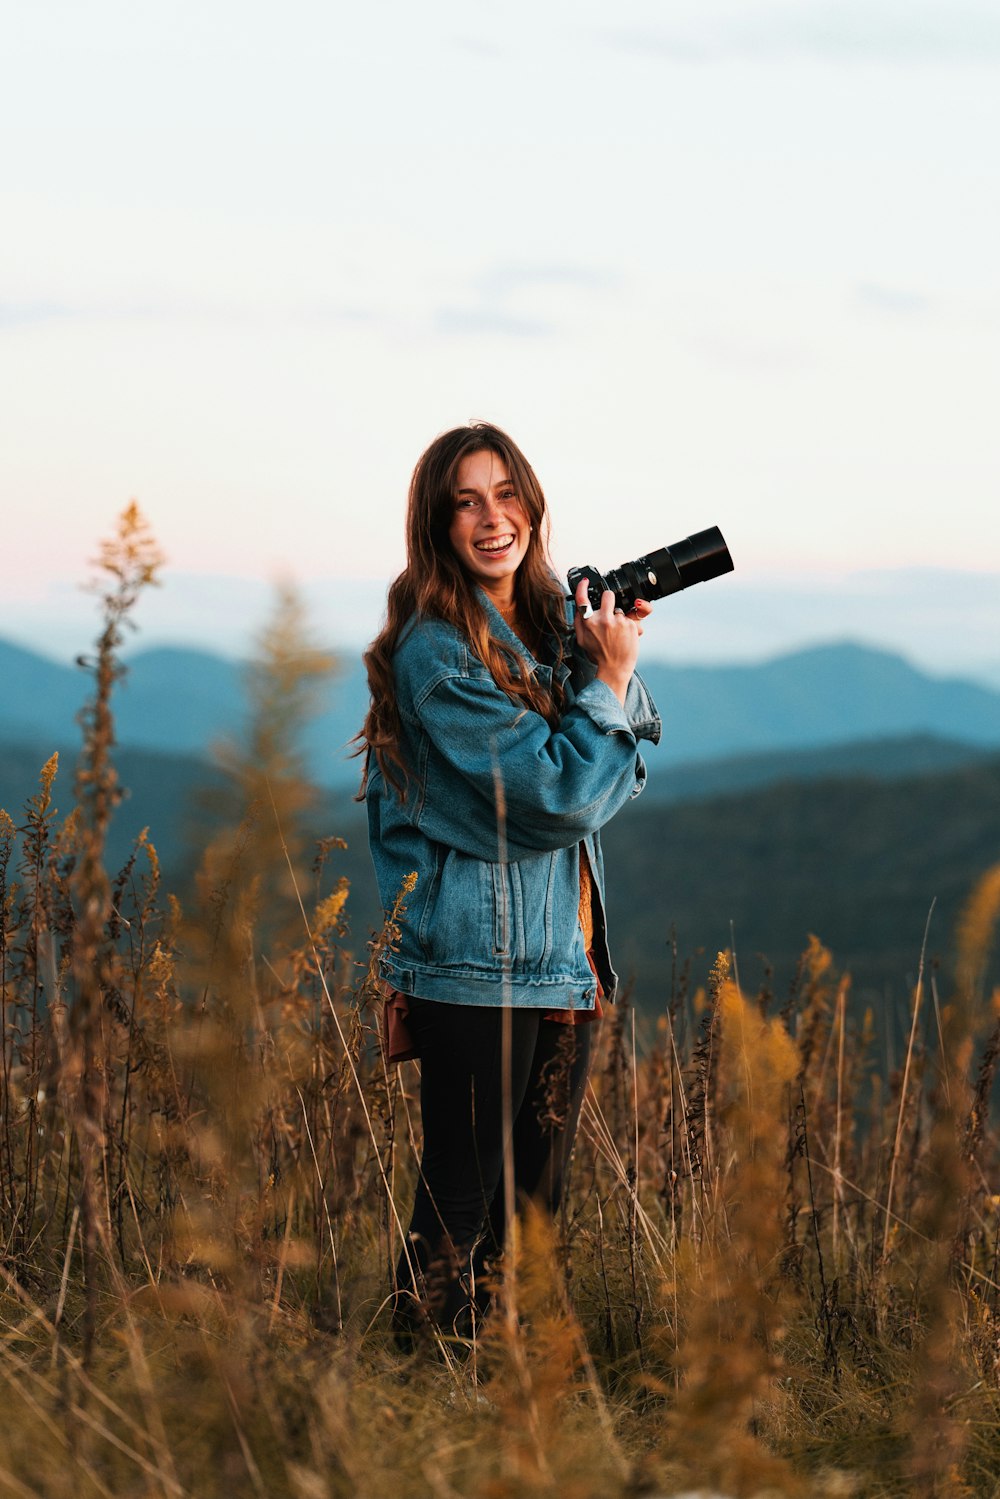 a woman taking a picture with a camera